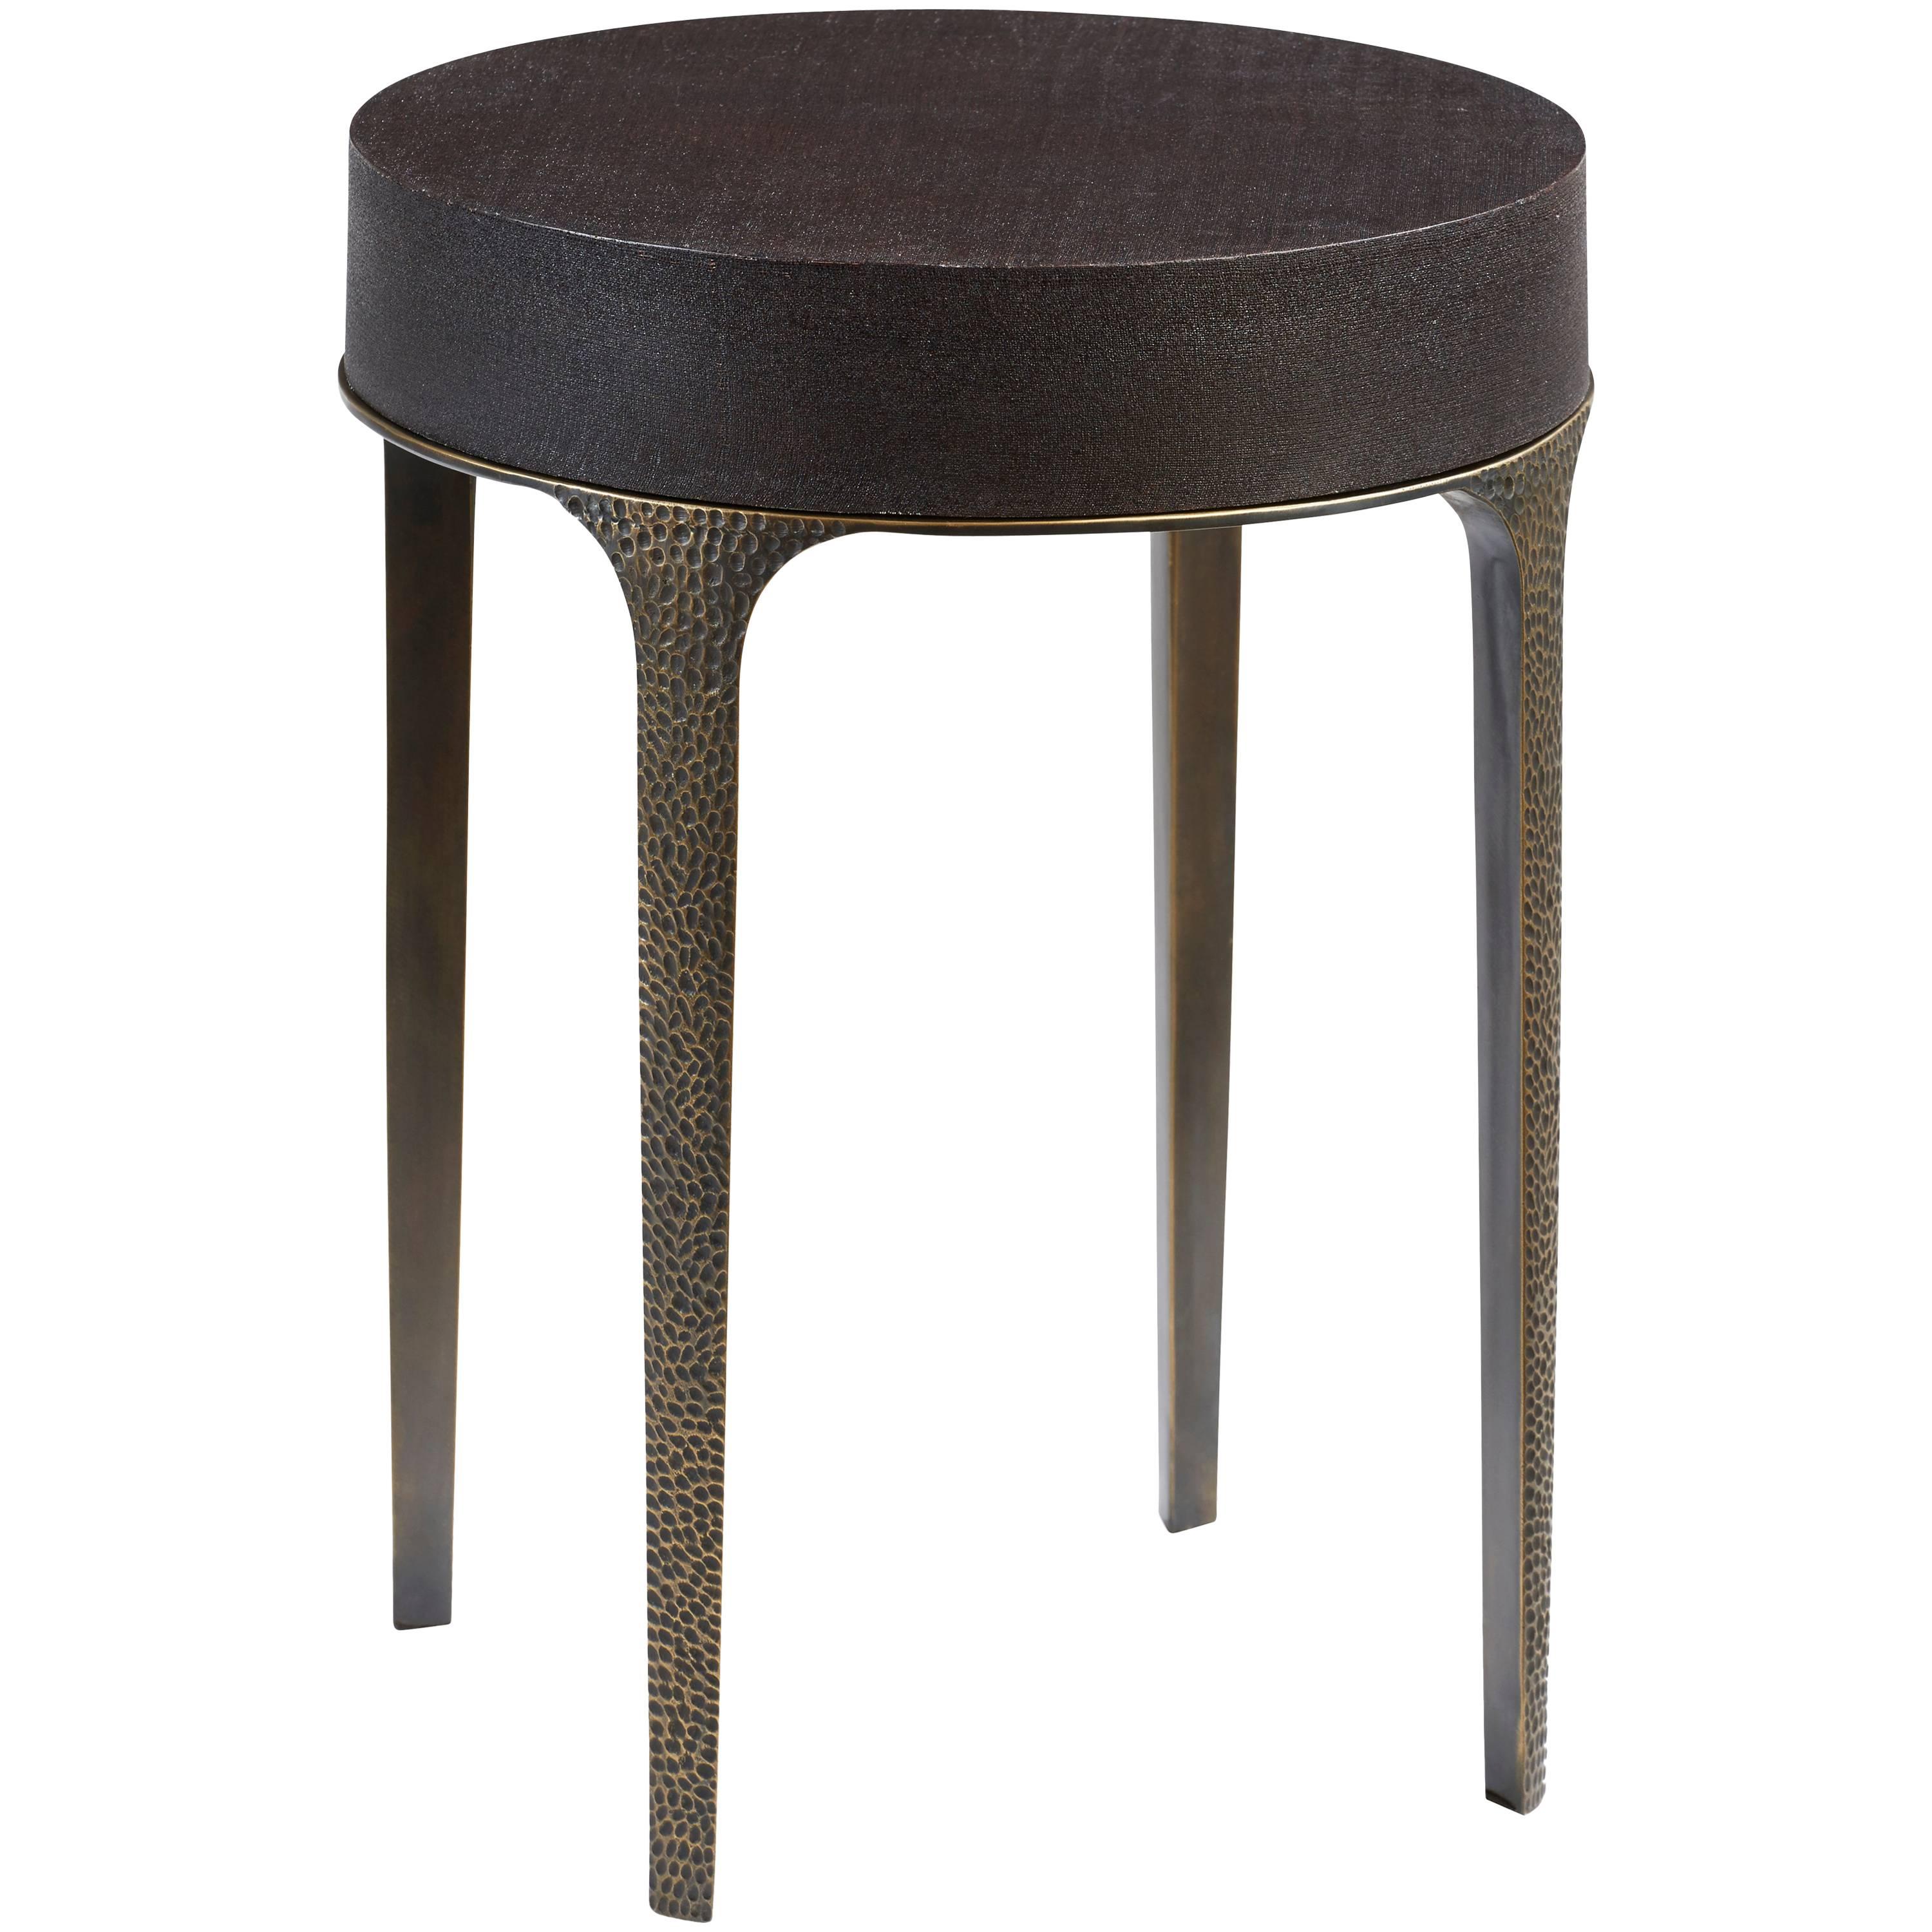 Side Table, LADY BUG by Reda Amalou Design, 2017, Legs in Hammered bronze  For Sale